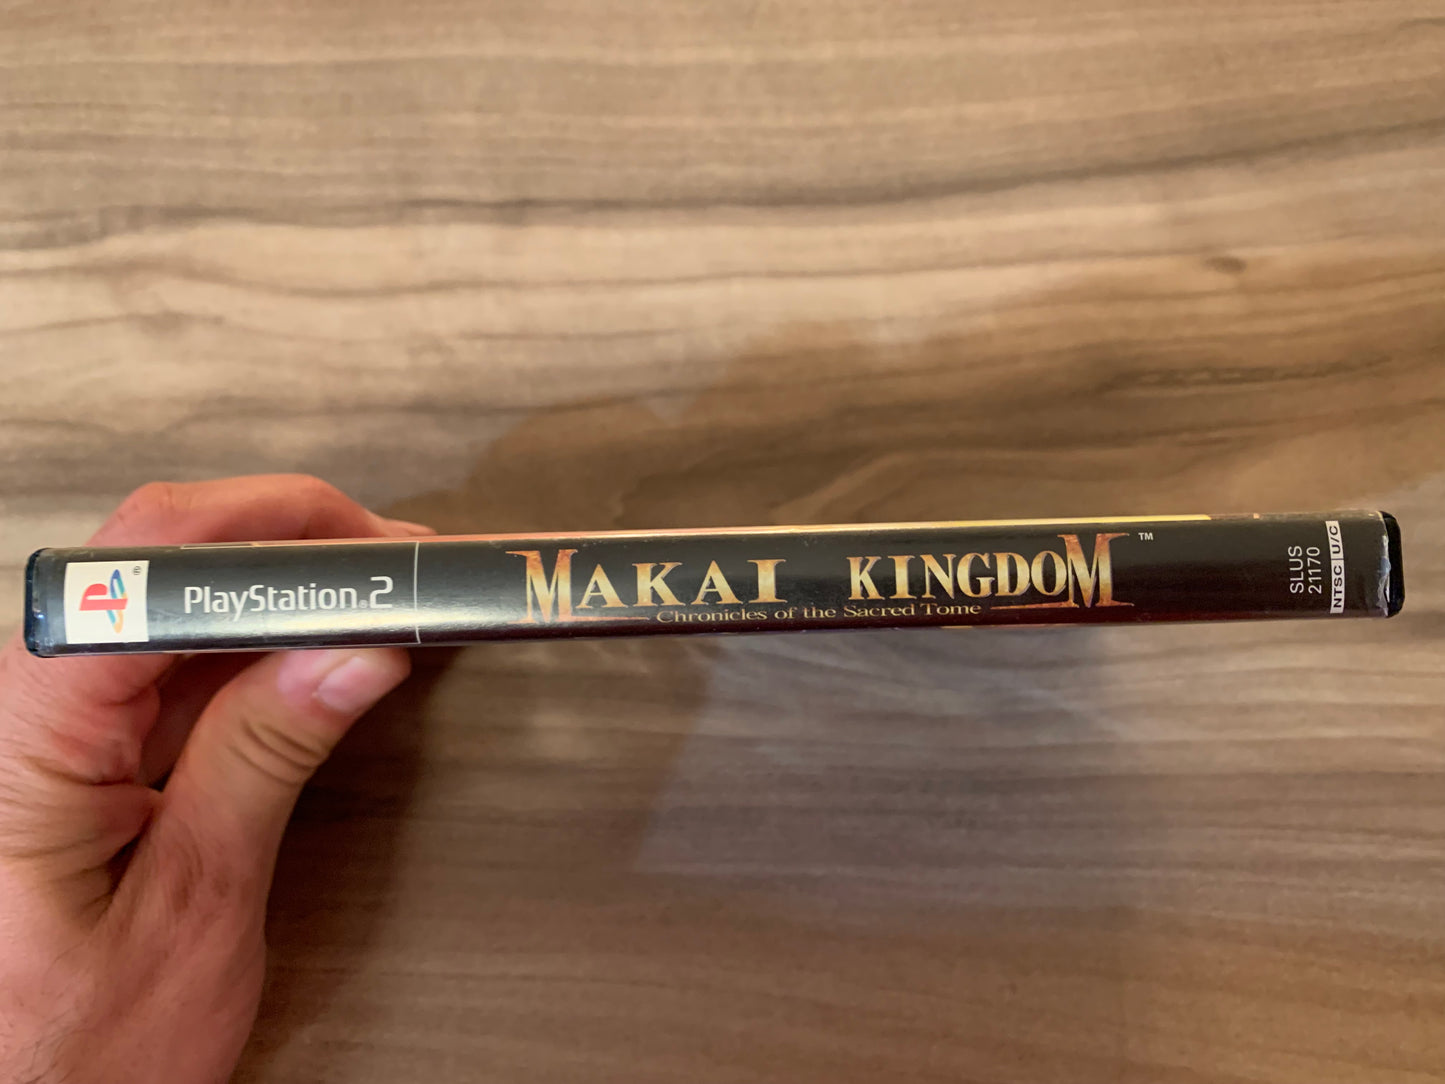 SONY PLAYSTATiON 2 [PS2] | MAKAi KiNGDOM CHRONiCLES OF THE SACRED TOME